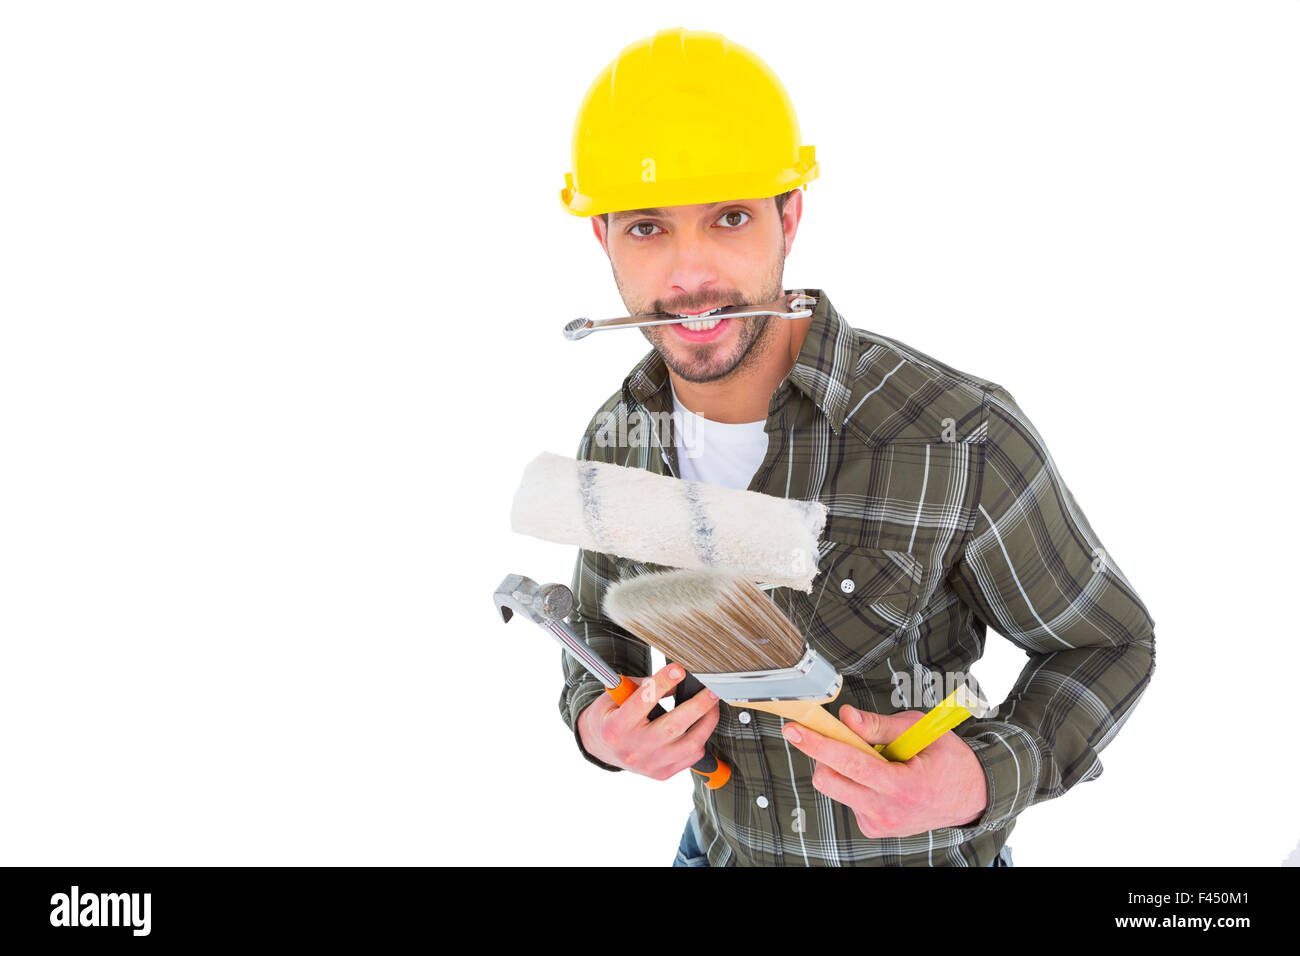 Manual worker holding various tools Stock Photo